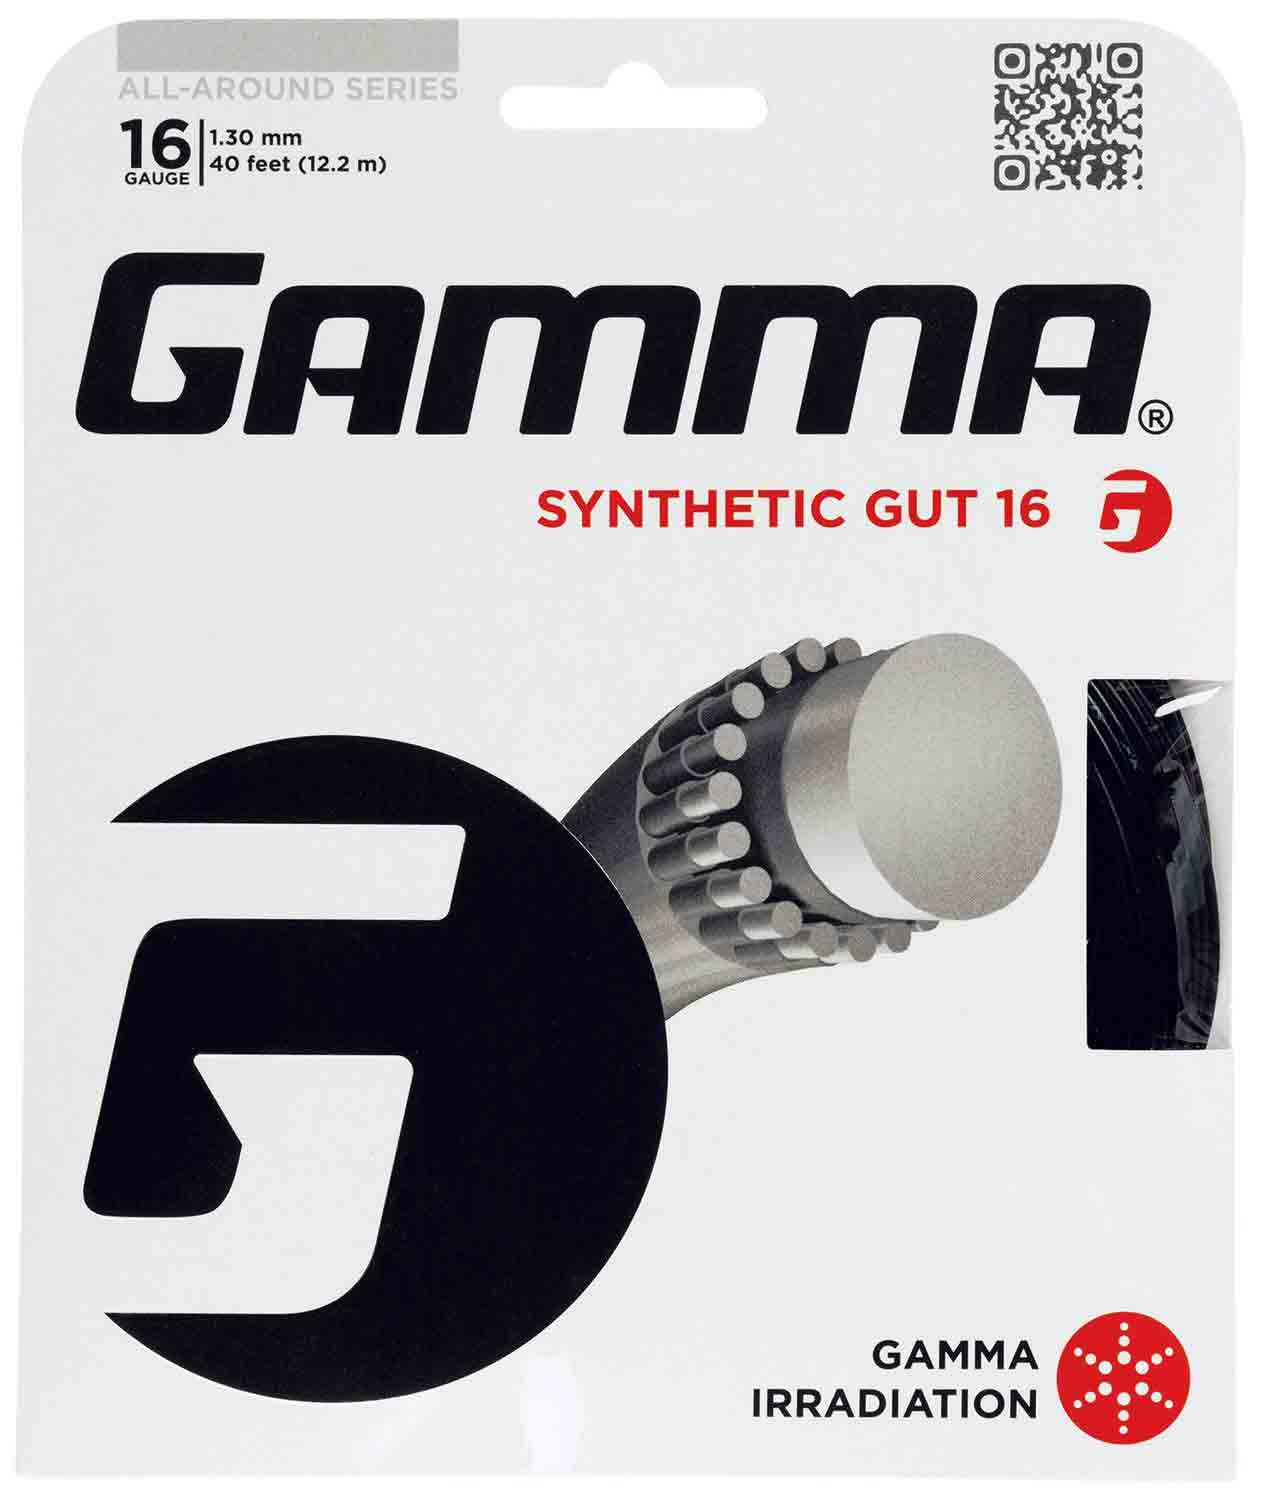 Gamma Synthetic Gut Tennis String. Tennis String, Tennis Stringing, Tennis Restringing, Tennis Restring, Change Tennis String, Tennis String Repair, Tennis String Replacement, Singapore